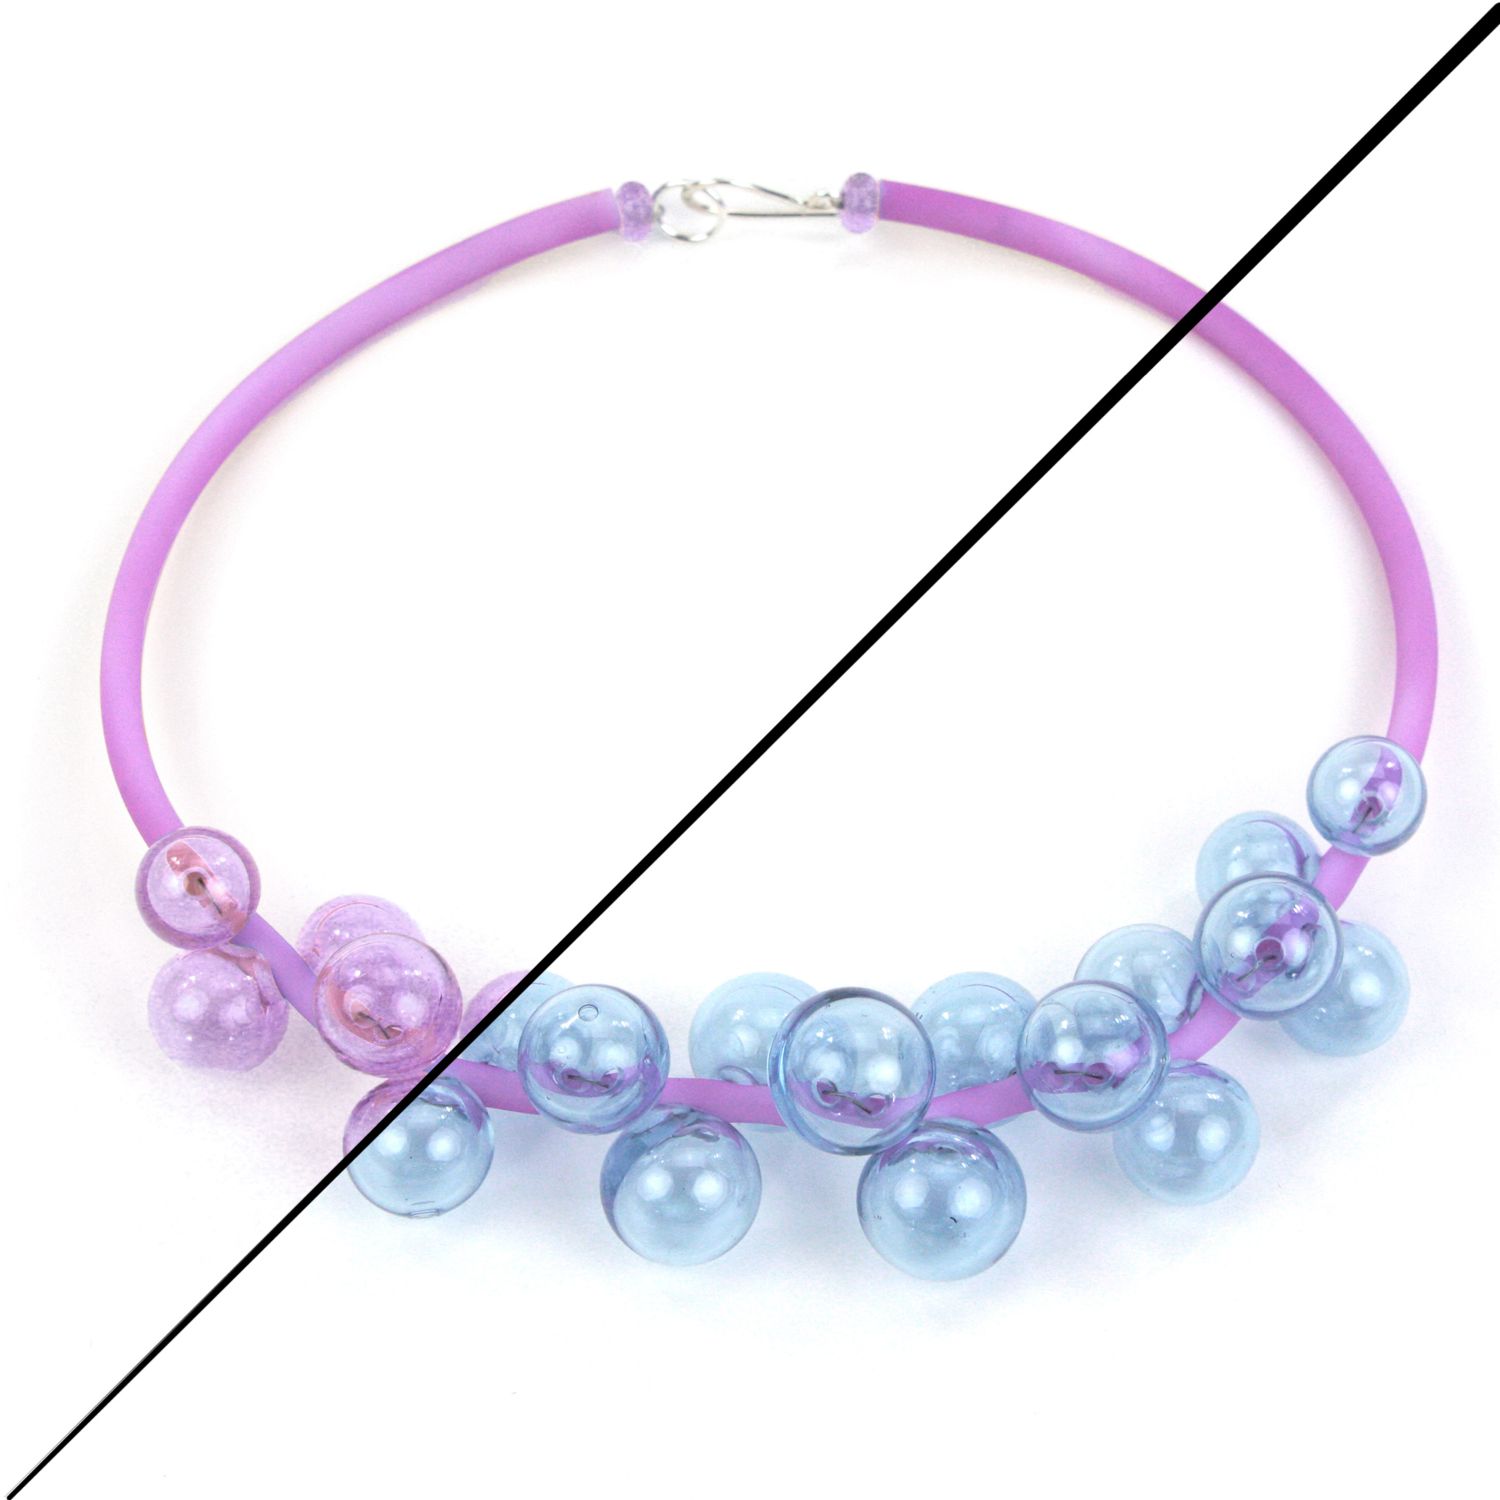 Alicia Niles: Chroma Bolla Necklace – Blue/Purple changing colour Product Image 5 of 6